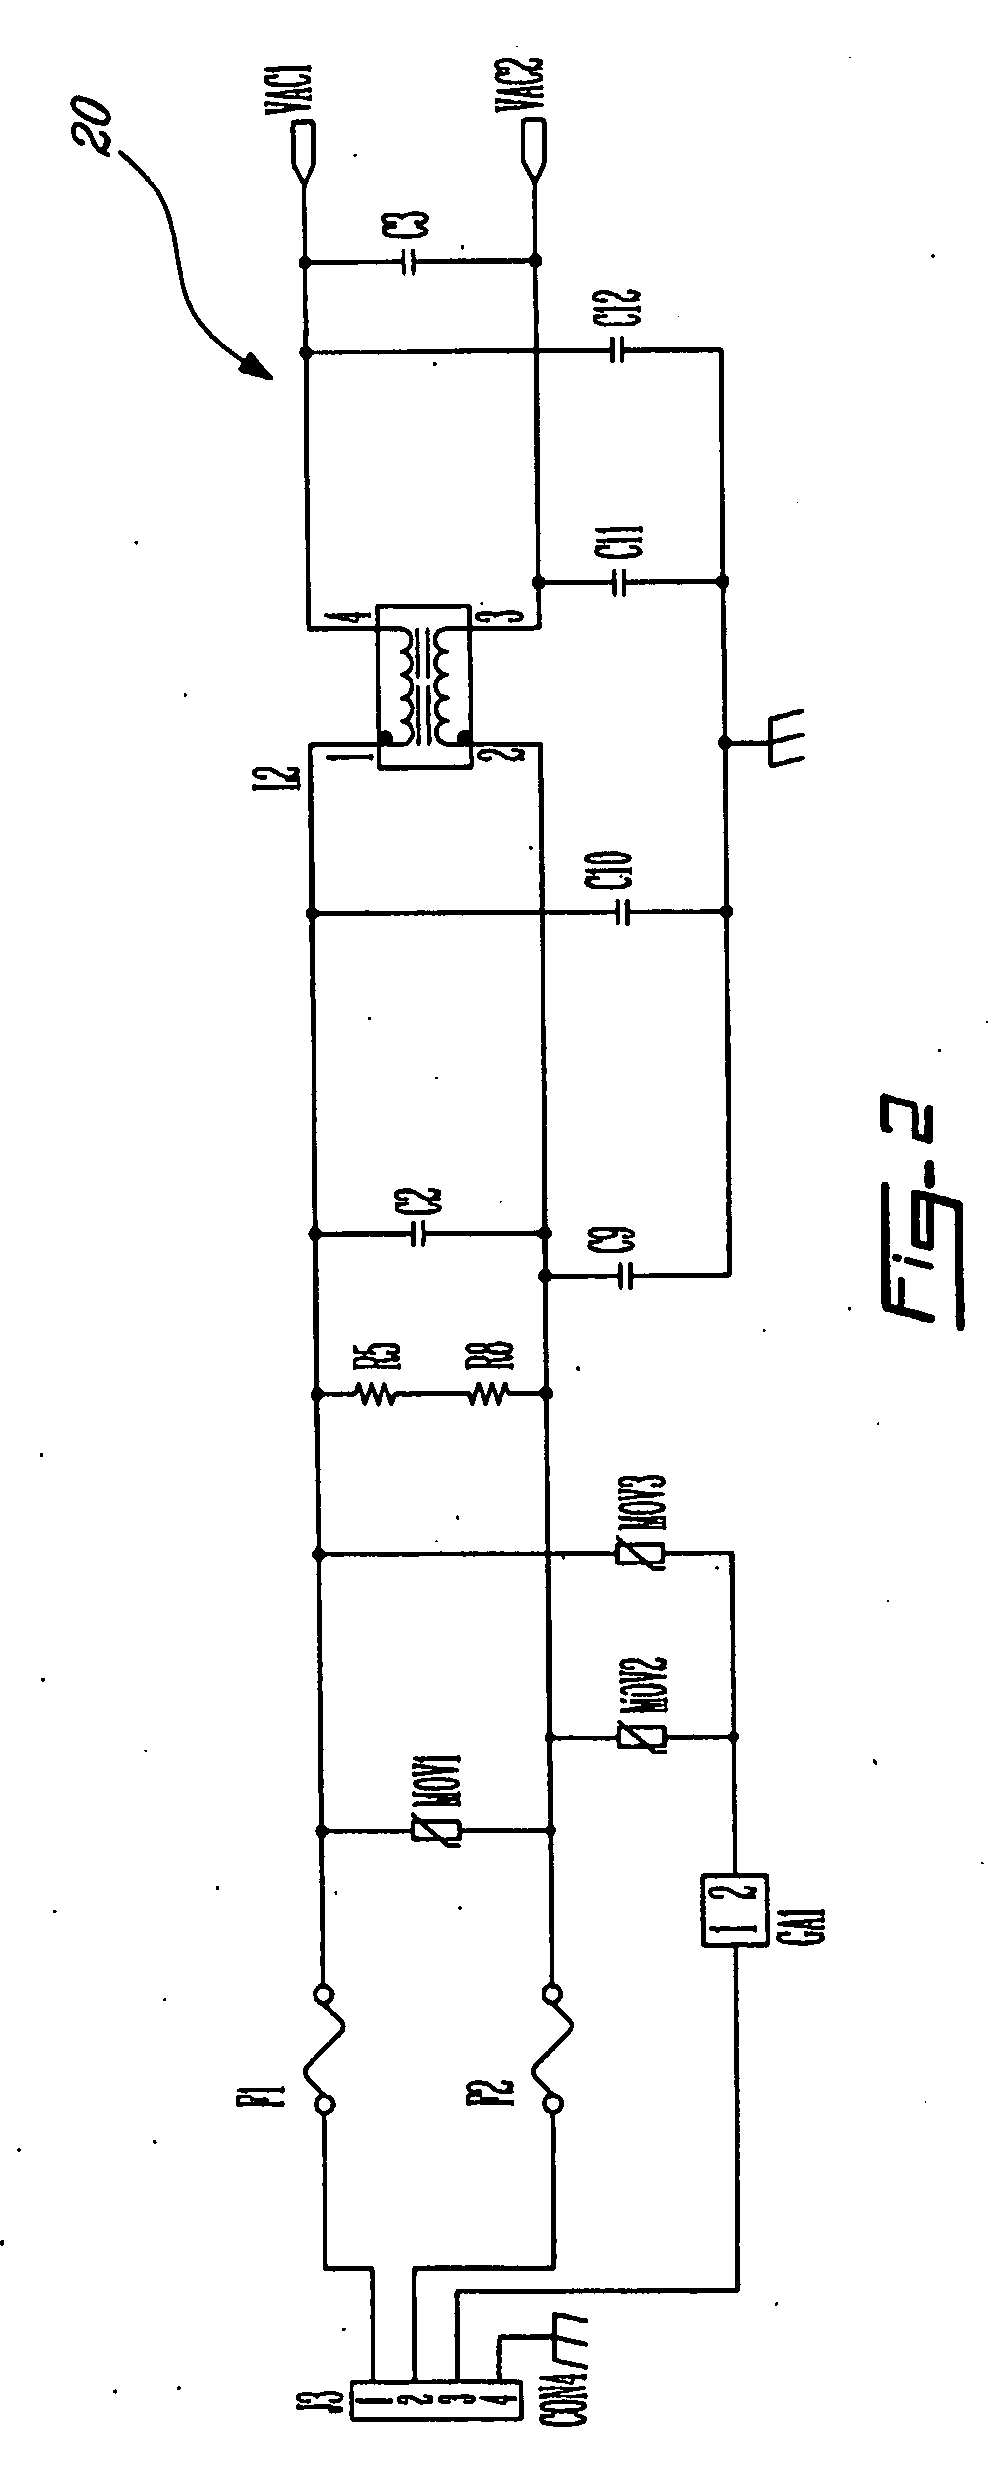 System And Method For Controlling A Matrix Of Light Emitting Diodes And Light Provided Therewith